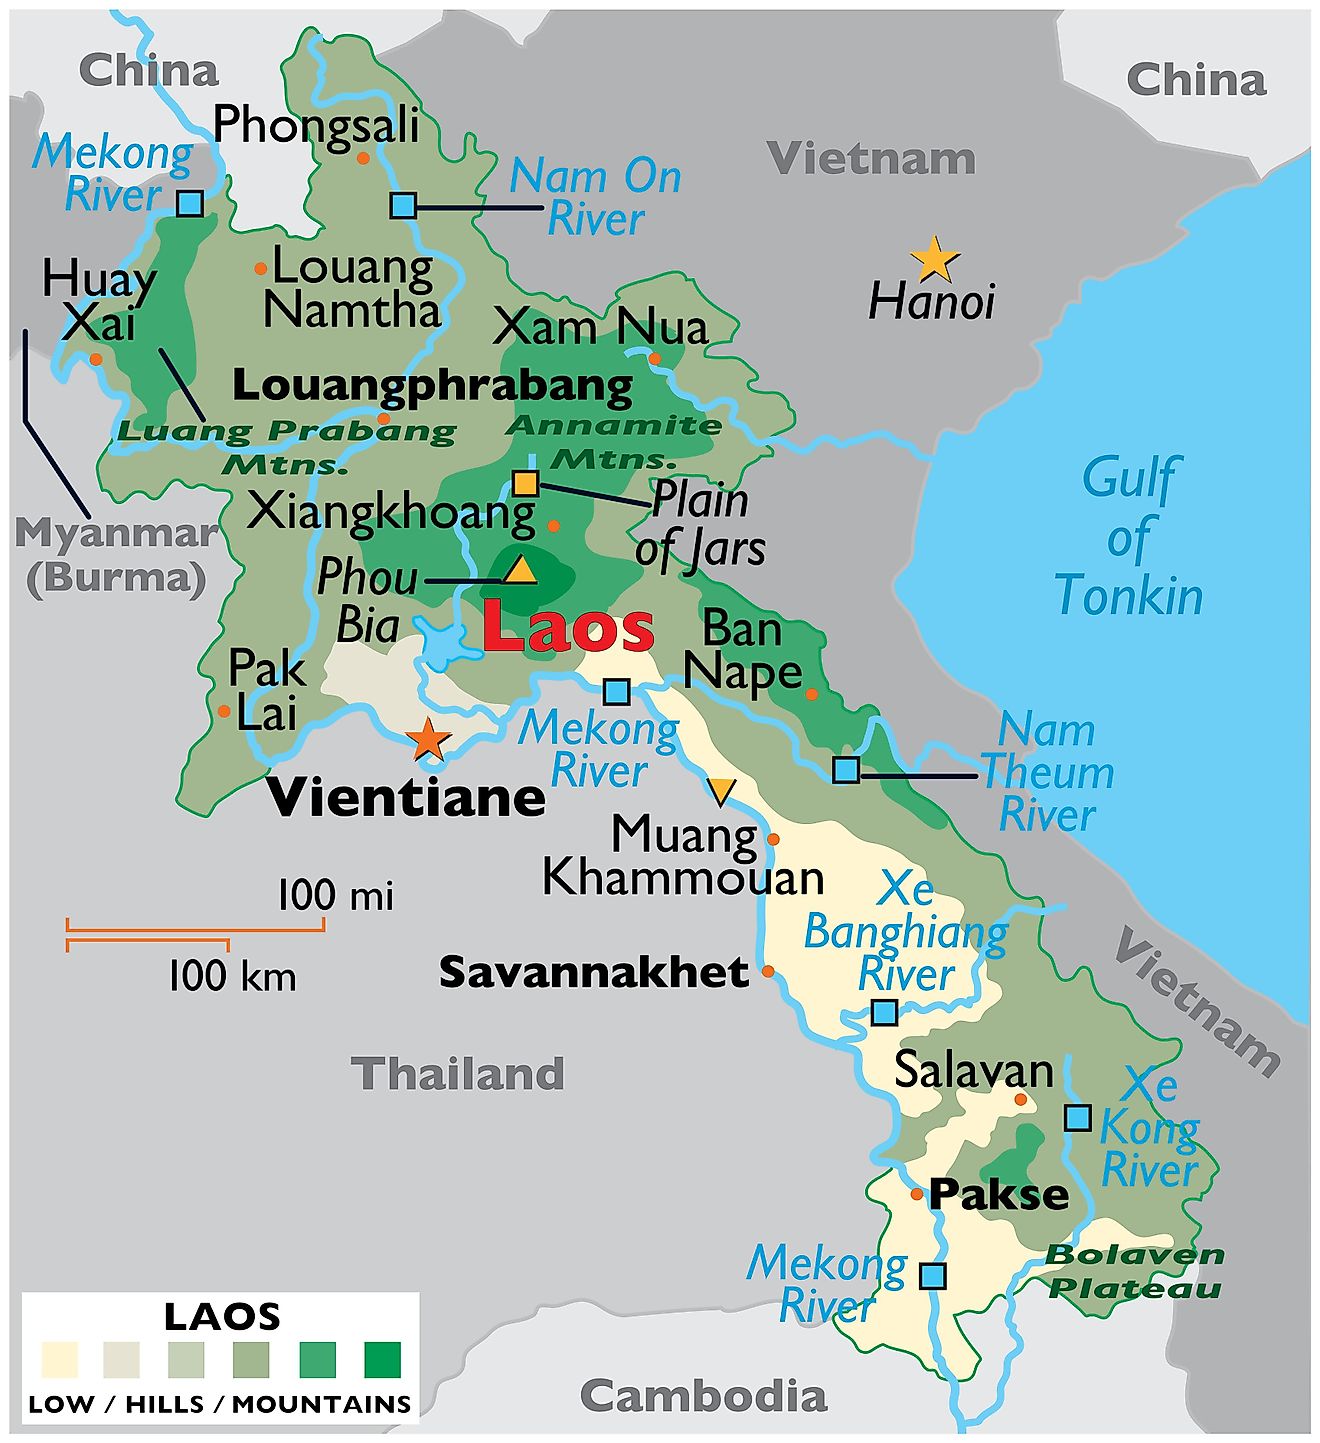 Physical Map of Laos showing international boundaries, relief, highest point, important cities, important rivers, etc.